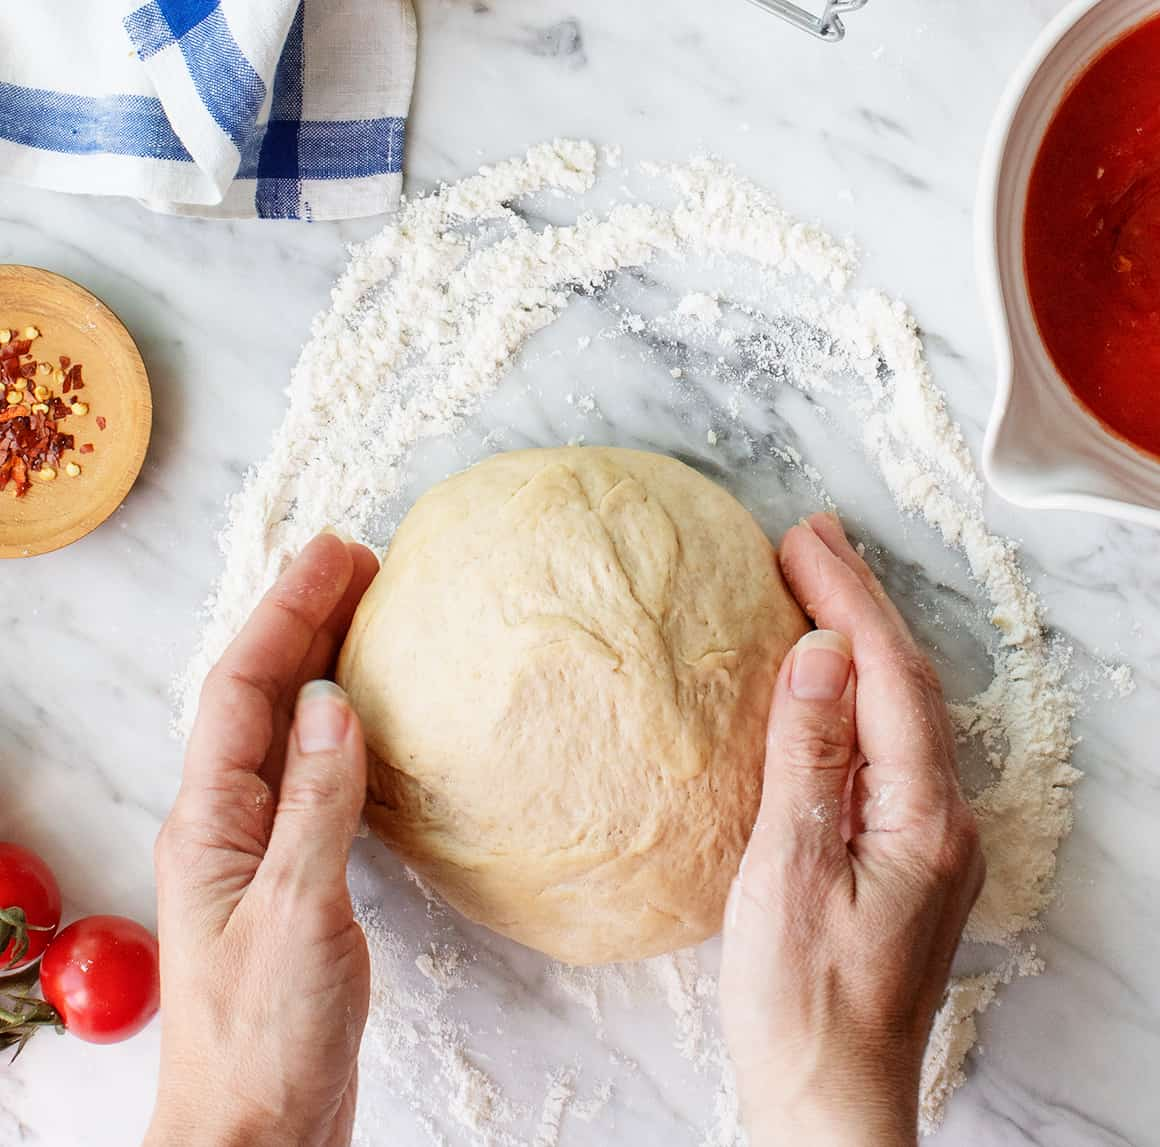 Can Pizza Dough be Baked into Bread?